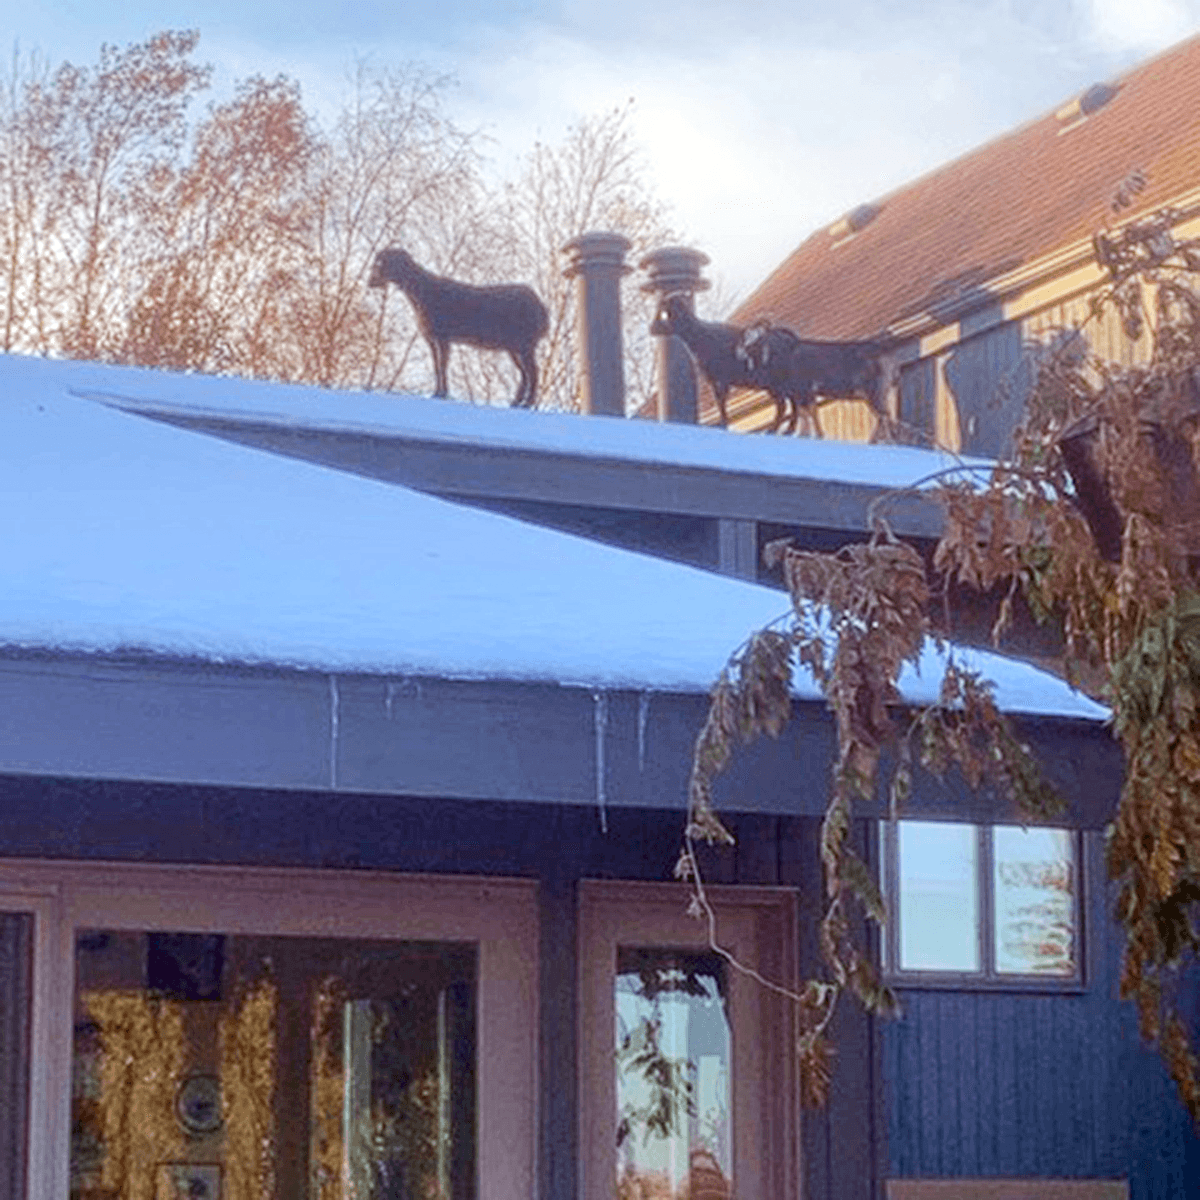 Goats on a roof